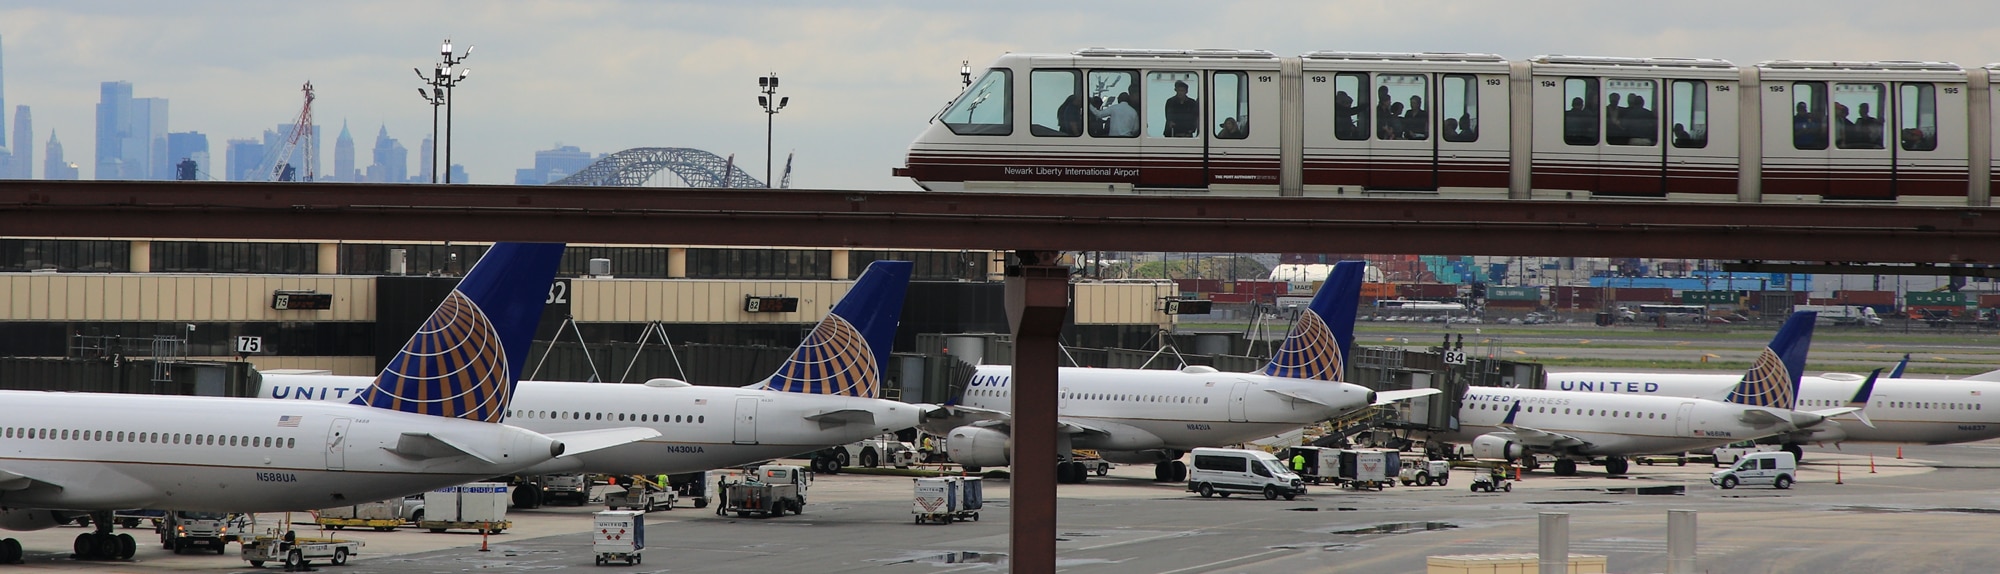 How to get to Newark Airport on public transit